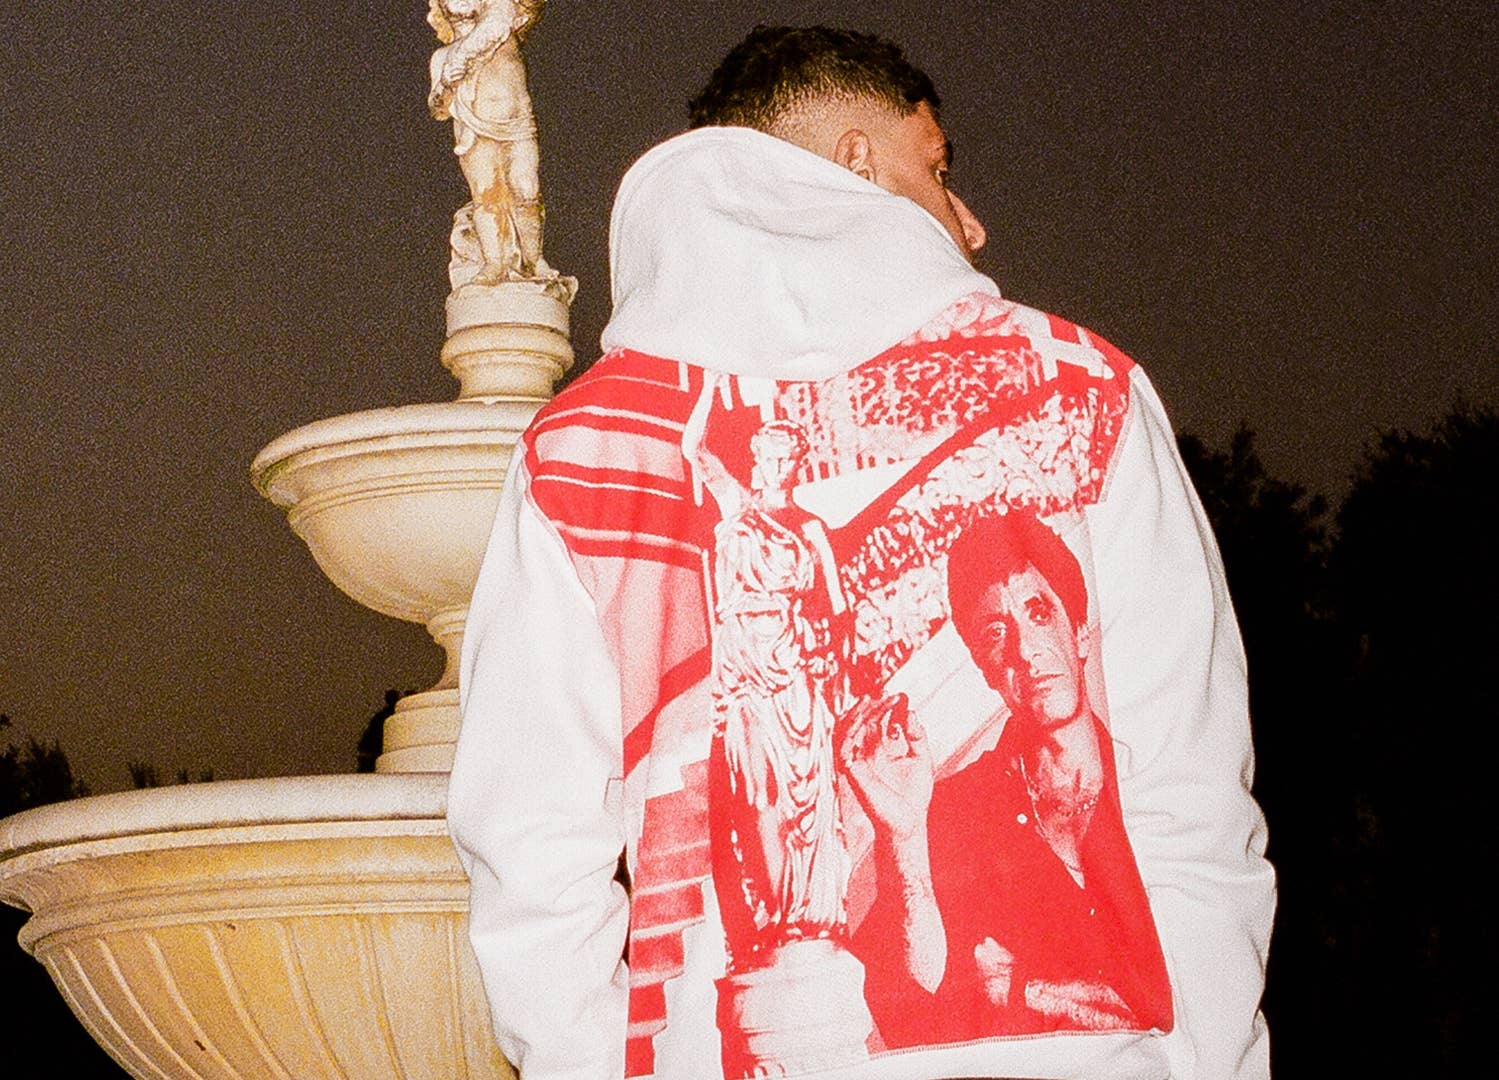 Model wearing a white hoodie with Tony Montana (Al Pacino) pictured in red.